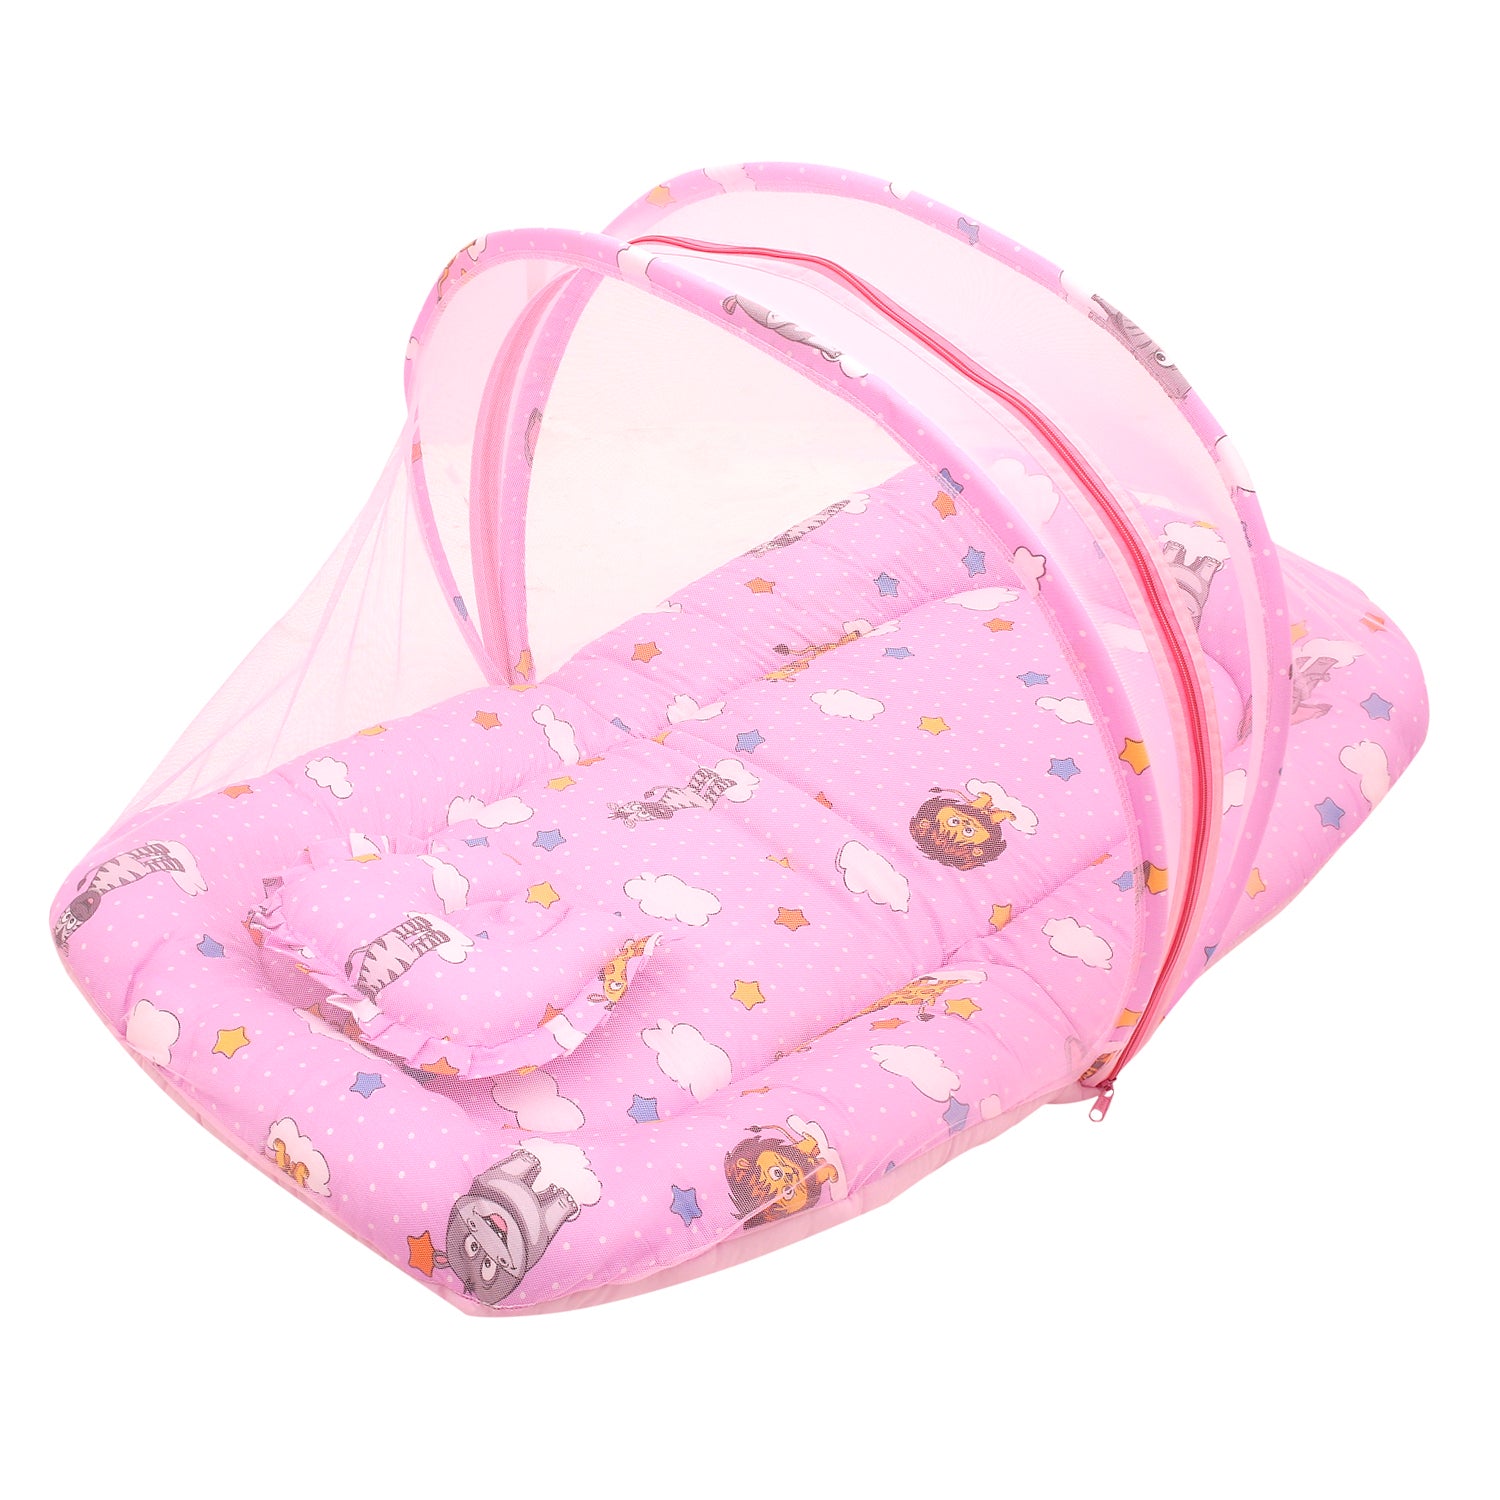 Mosquito Net Tent Mattress Set With Neck Pillow Flying Animals Pink - Baby Moo